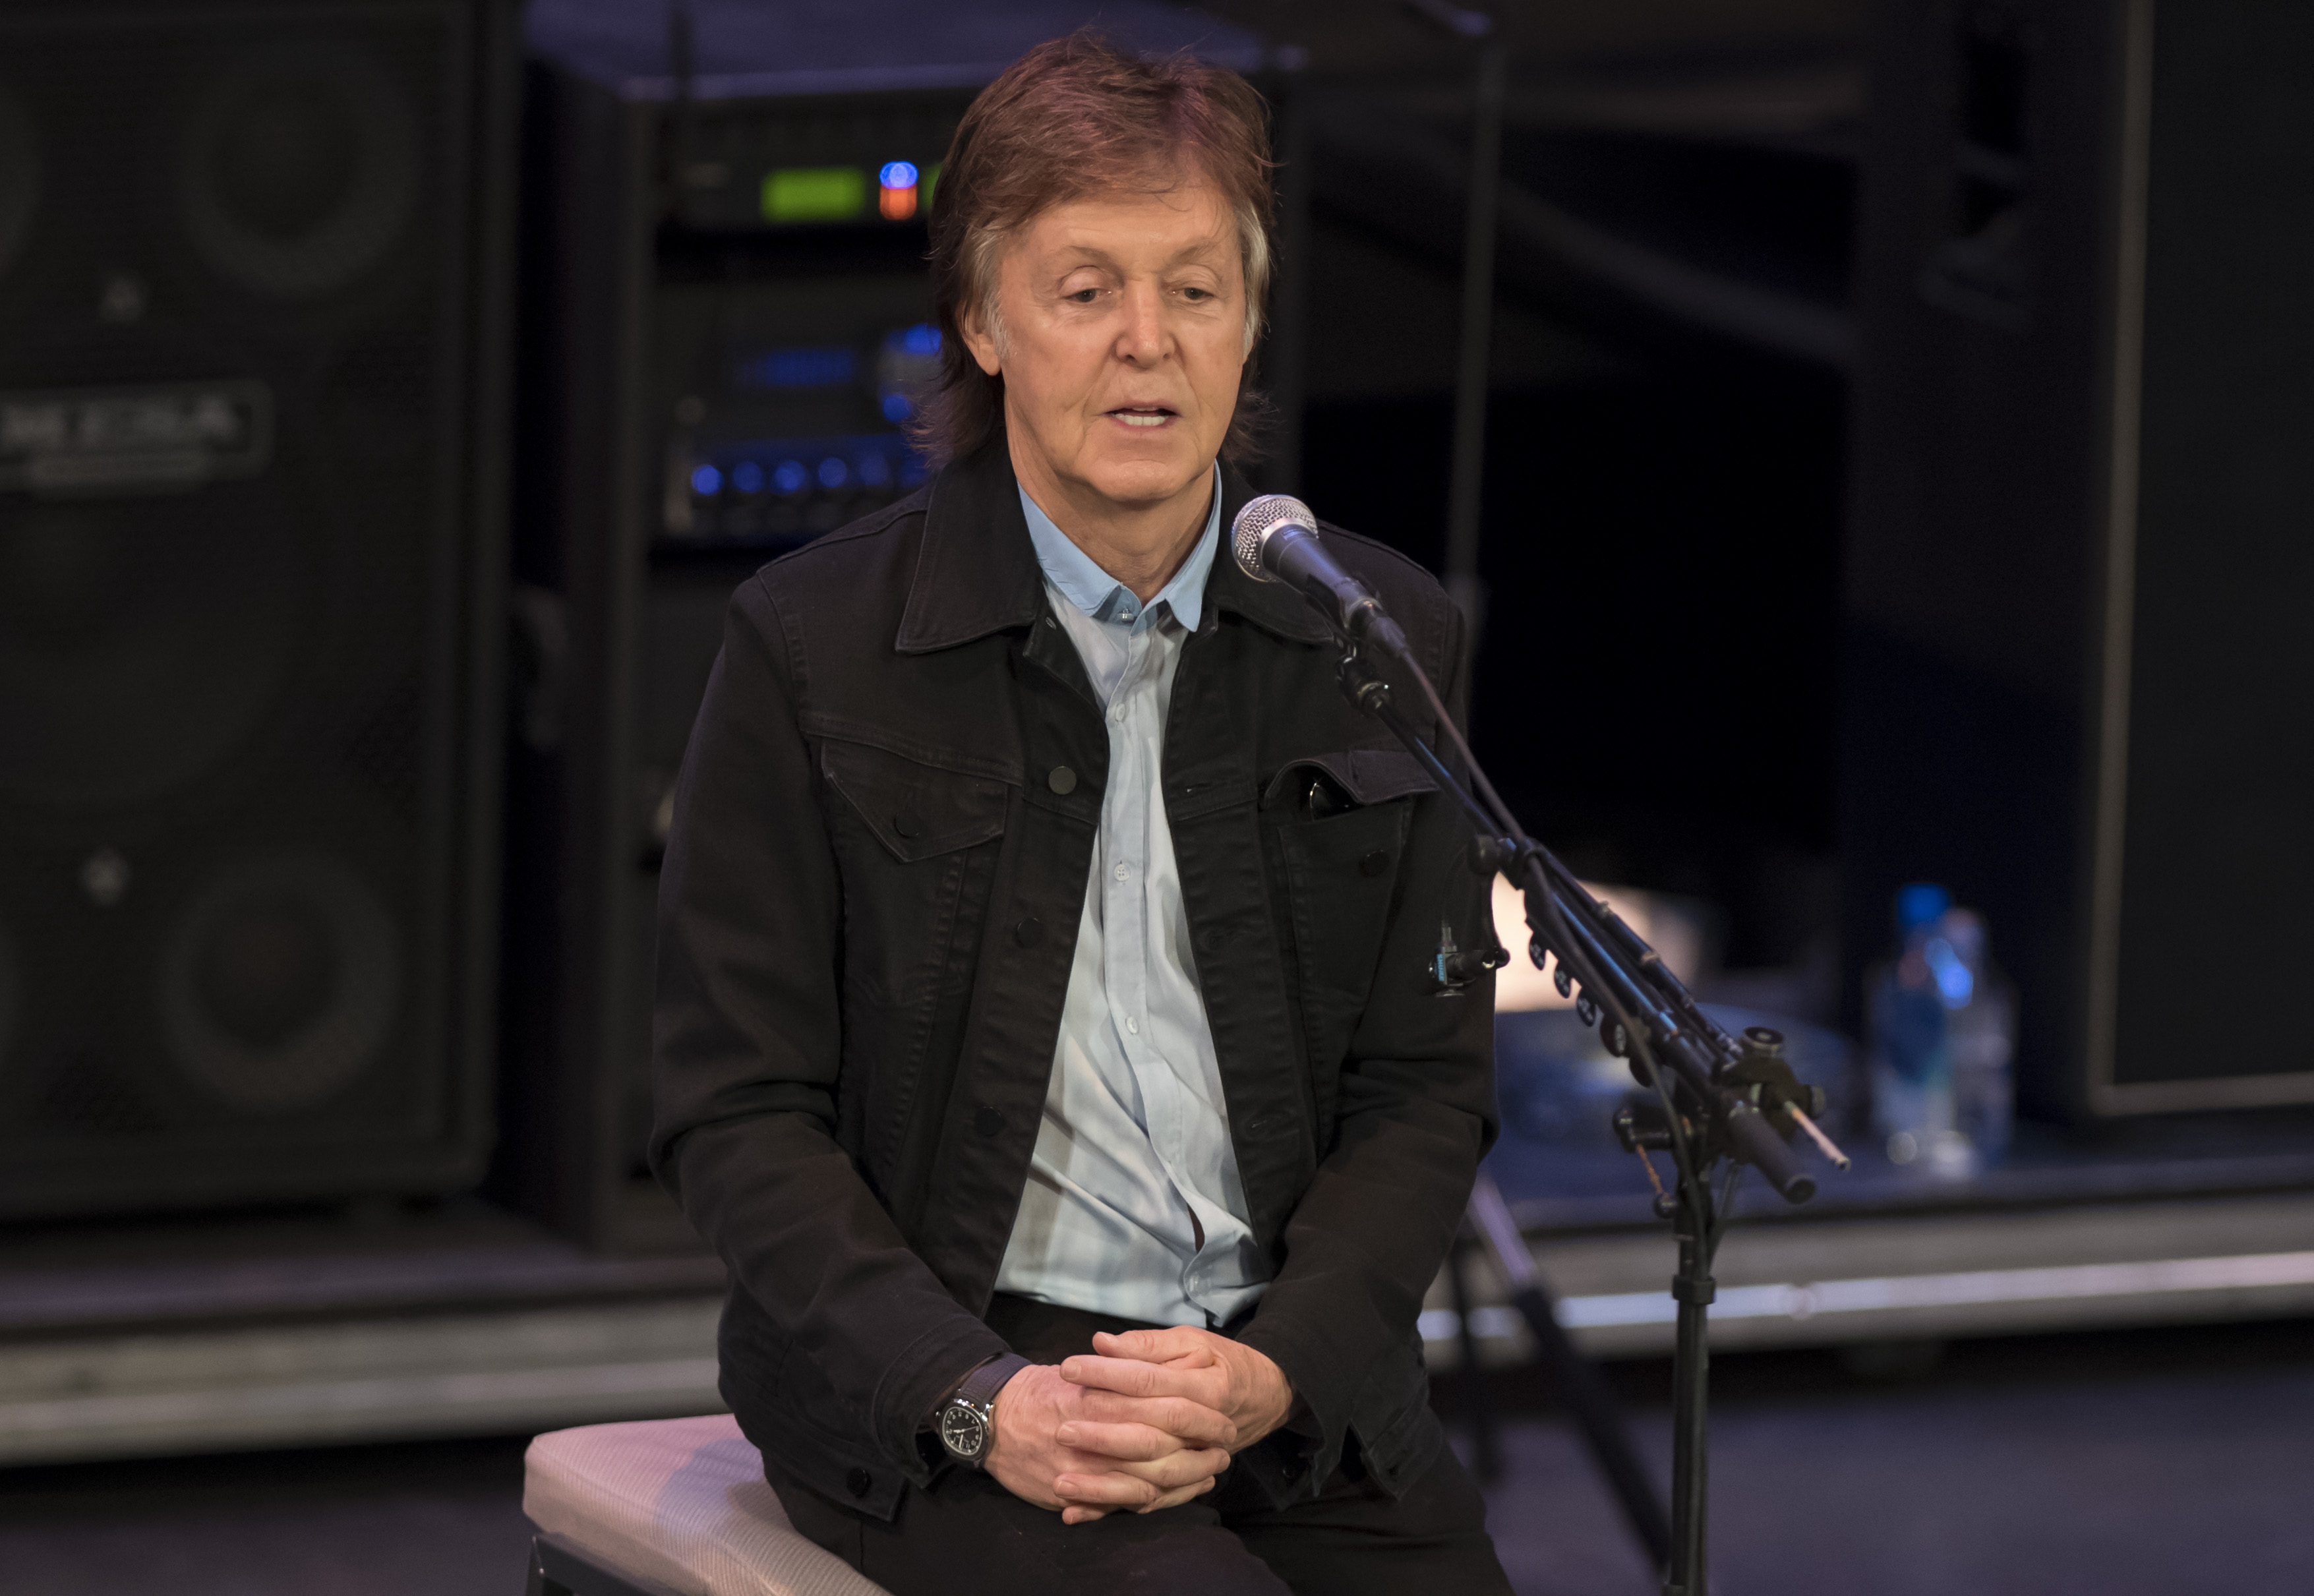 Paul McCartney speaks and performs at the Regal Theater in Australia